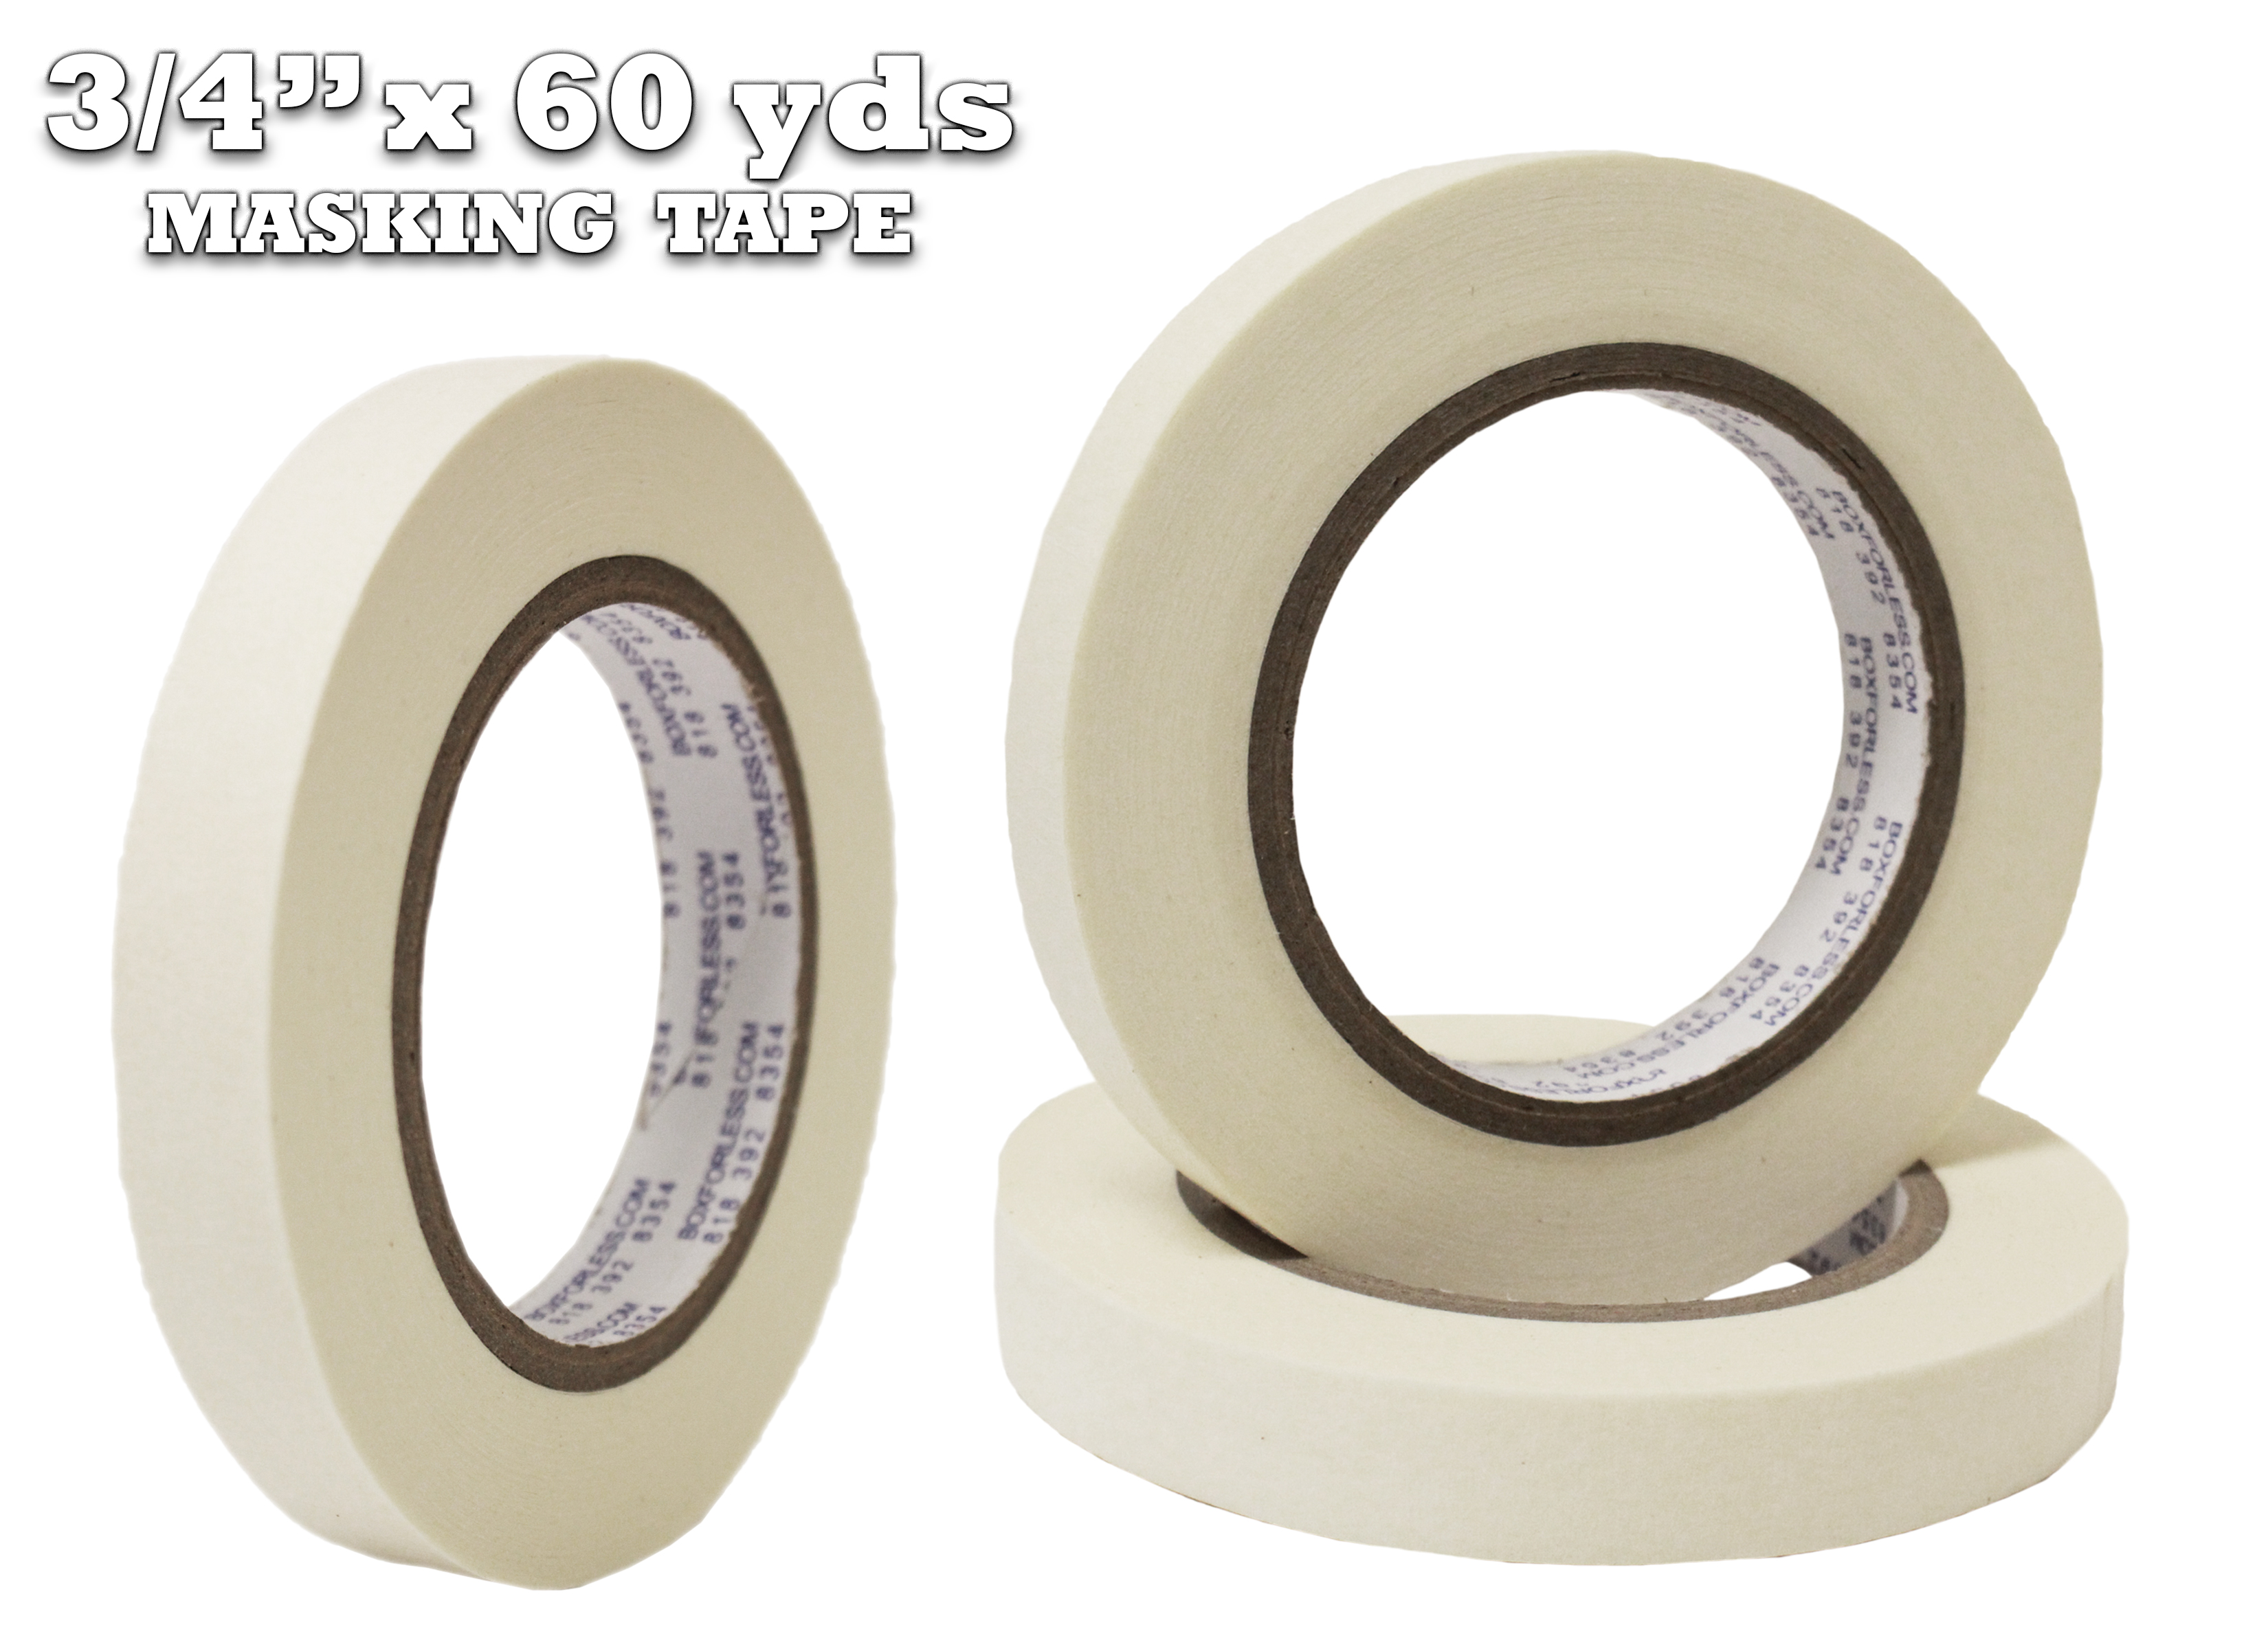 3/4x60 yds White Masking Tape 10 Rolls General Purpose Beige Painter's Tape  for Painting, Labeling, Packaging, Craft, Art, Hobbies, Home, Office,  School Stationary, etc. by WholesaleArtsFrames-com 